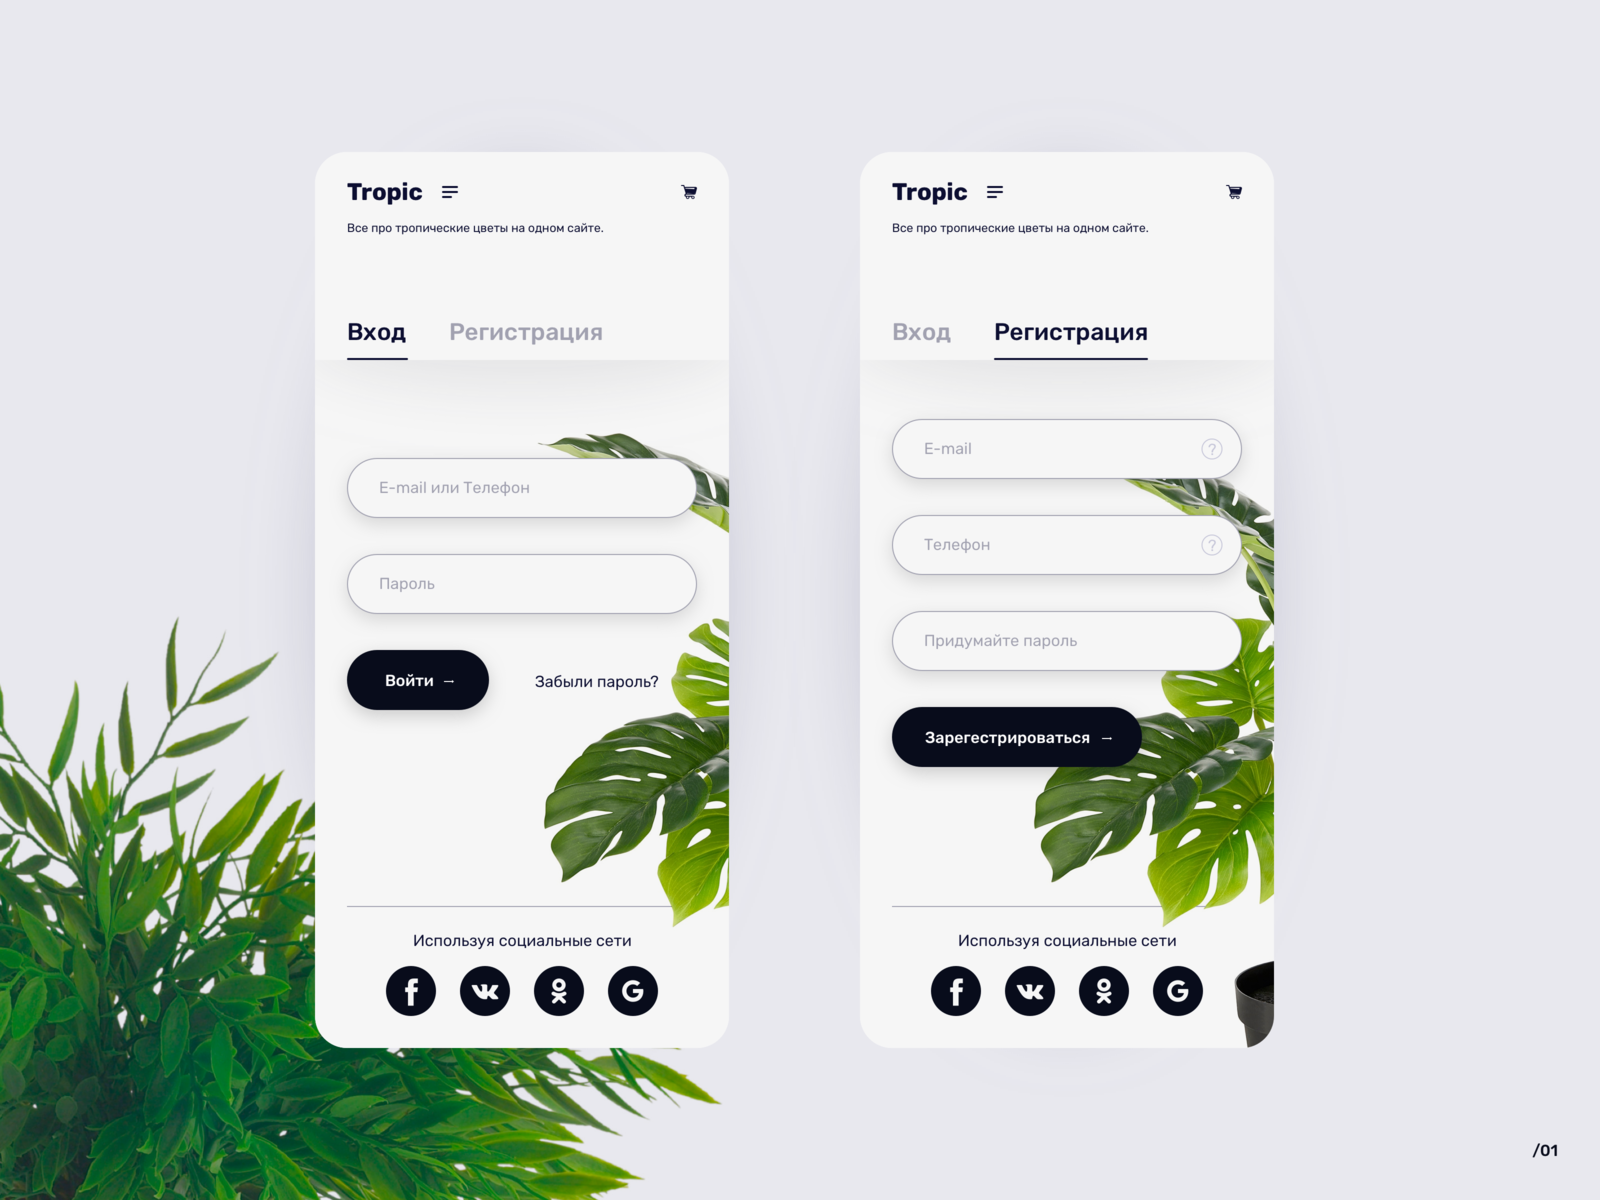 Sign in / Sign up UI by Sergey on Dribbble